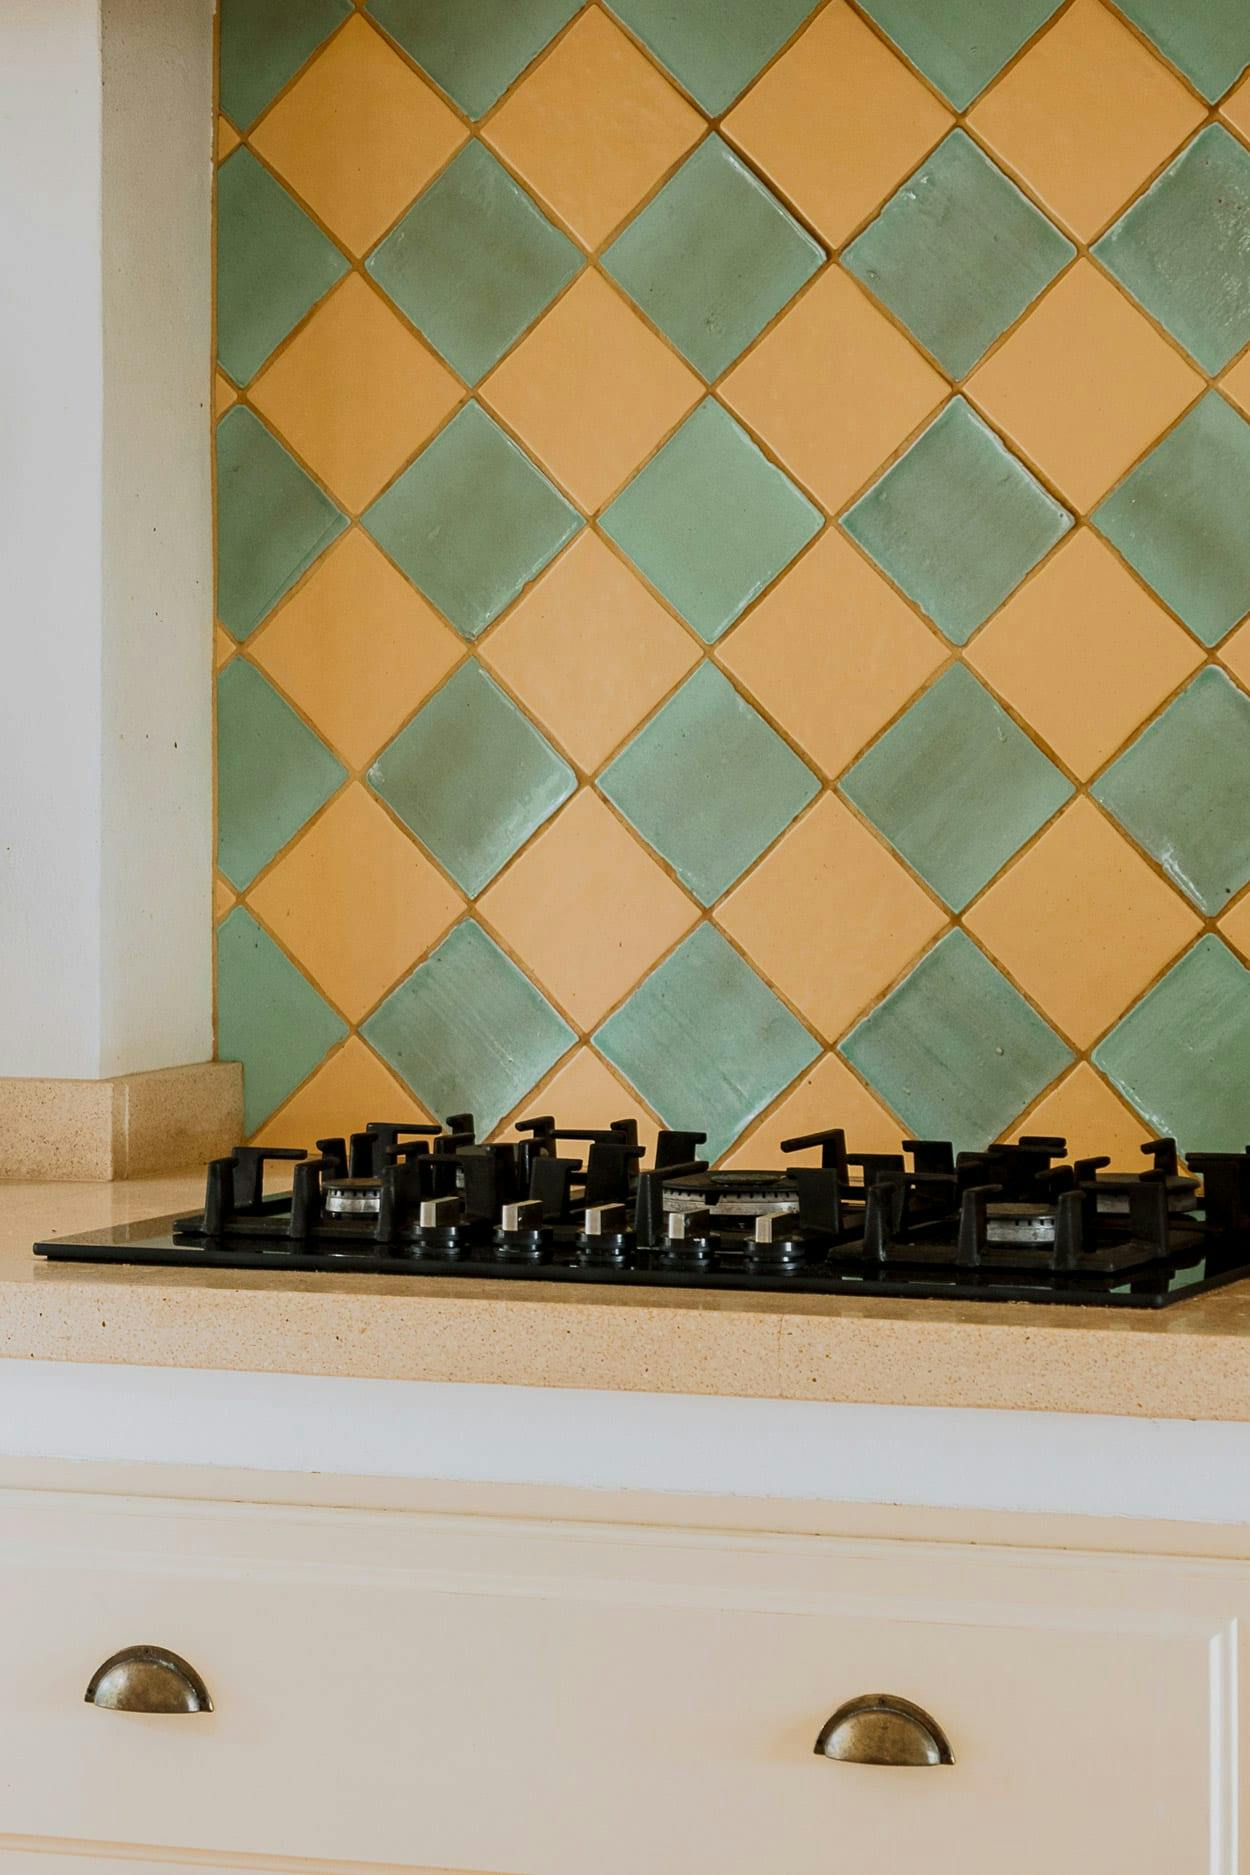 The image features a kitchen with a white stove top oven and a blue and yellow checkered tile backsplash.